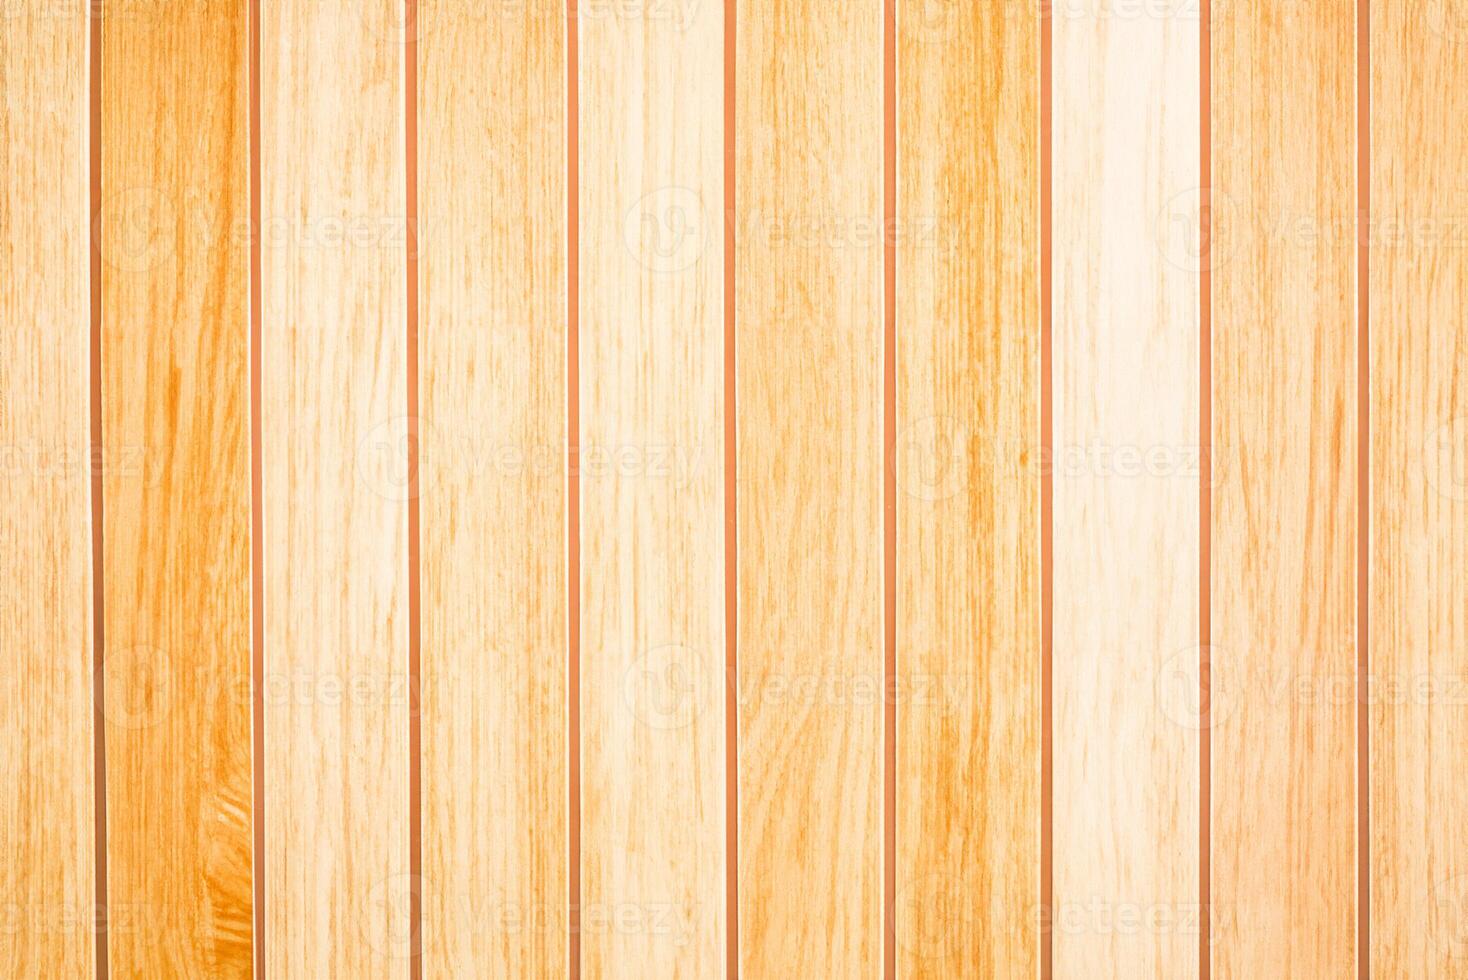 Natural Wood Textures, Background for Design and Creativity. photo